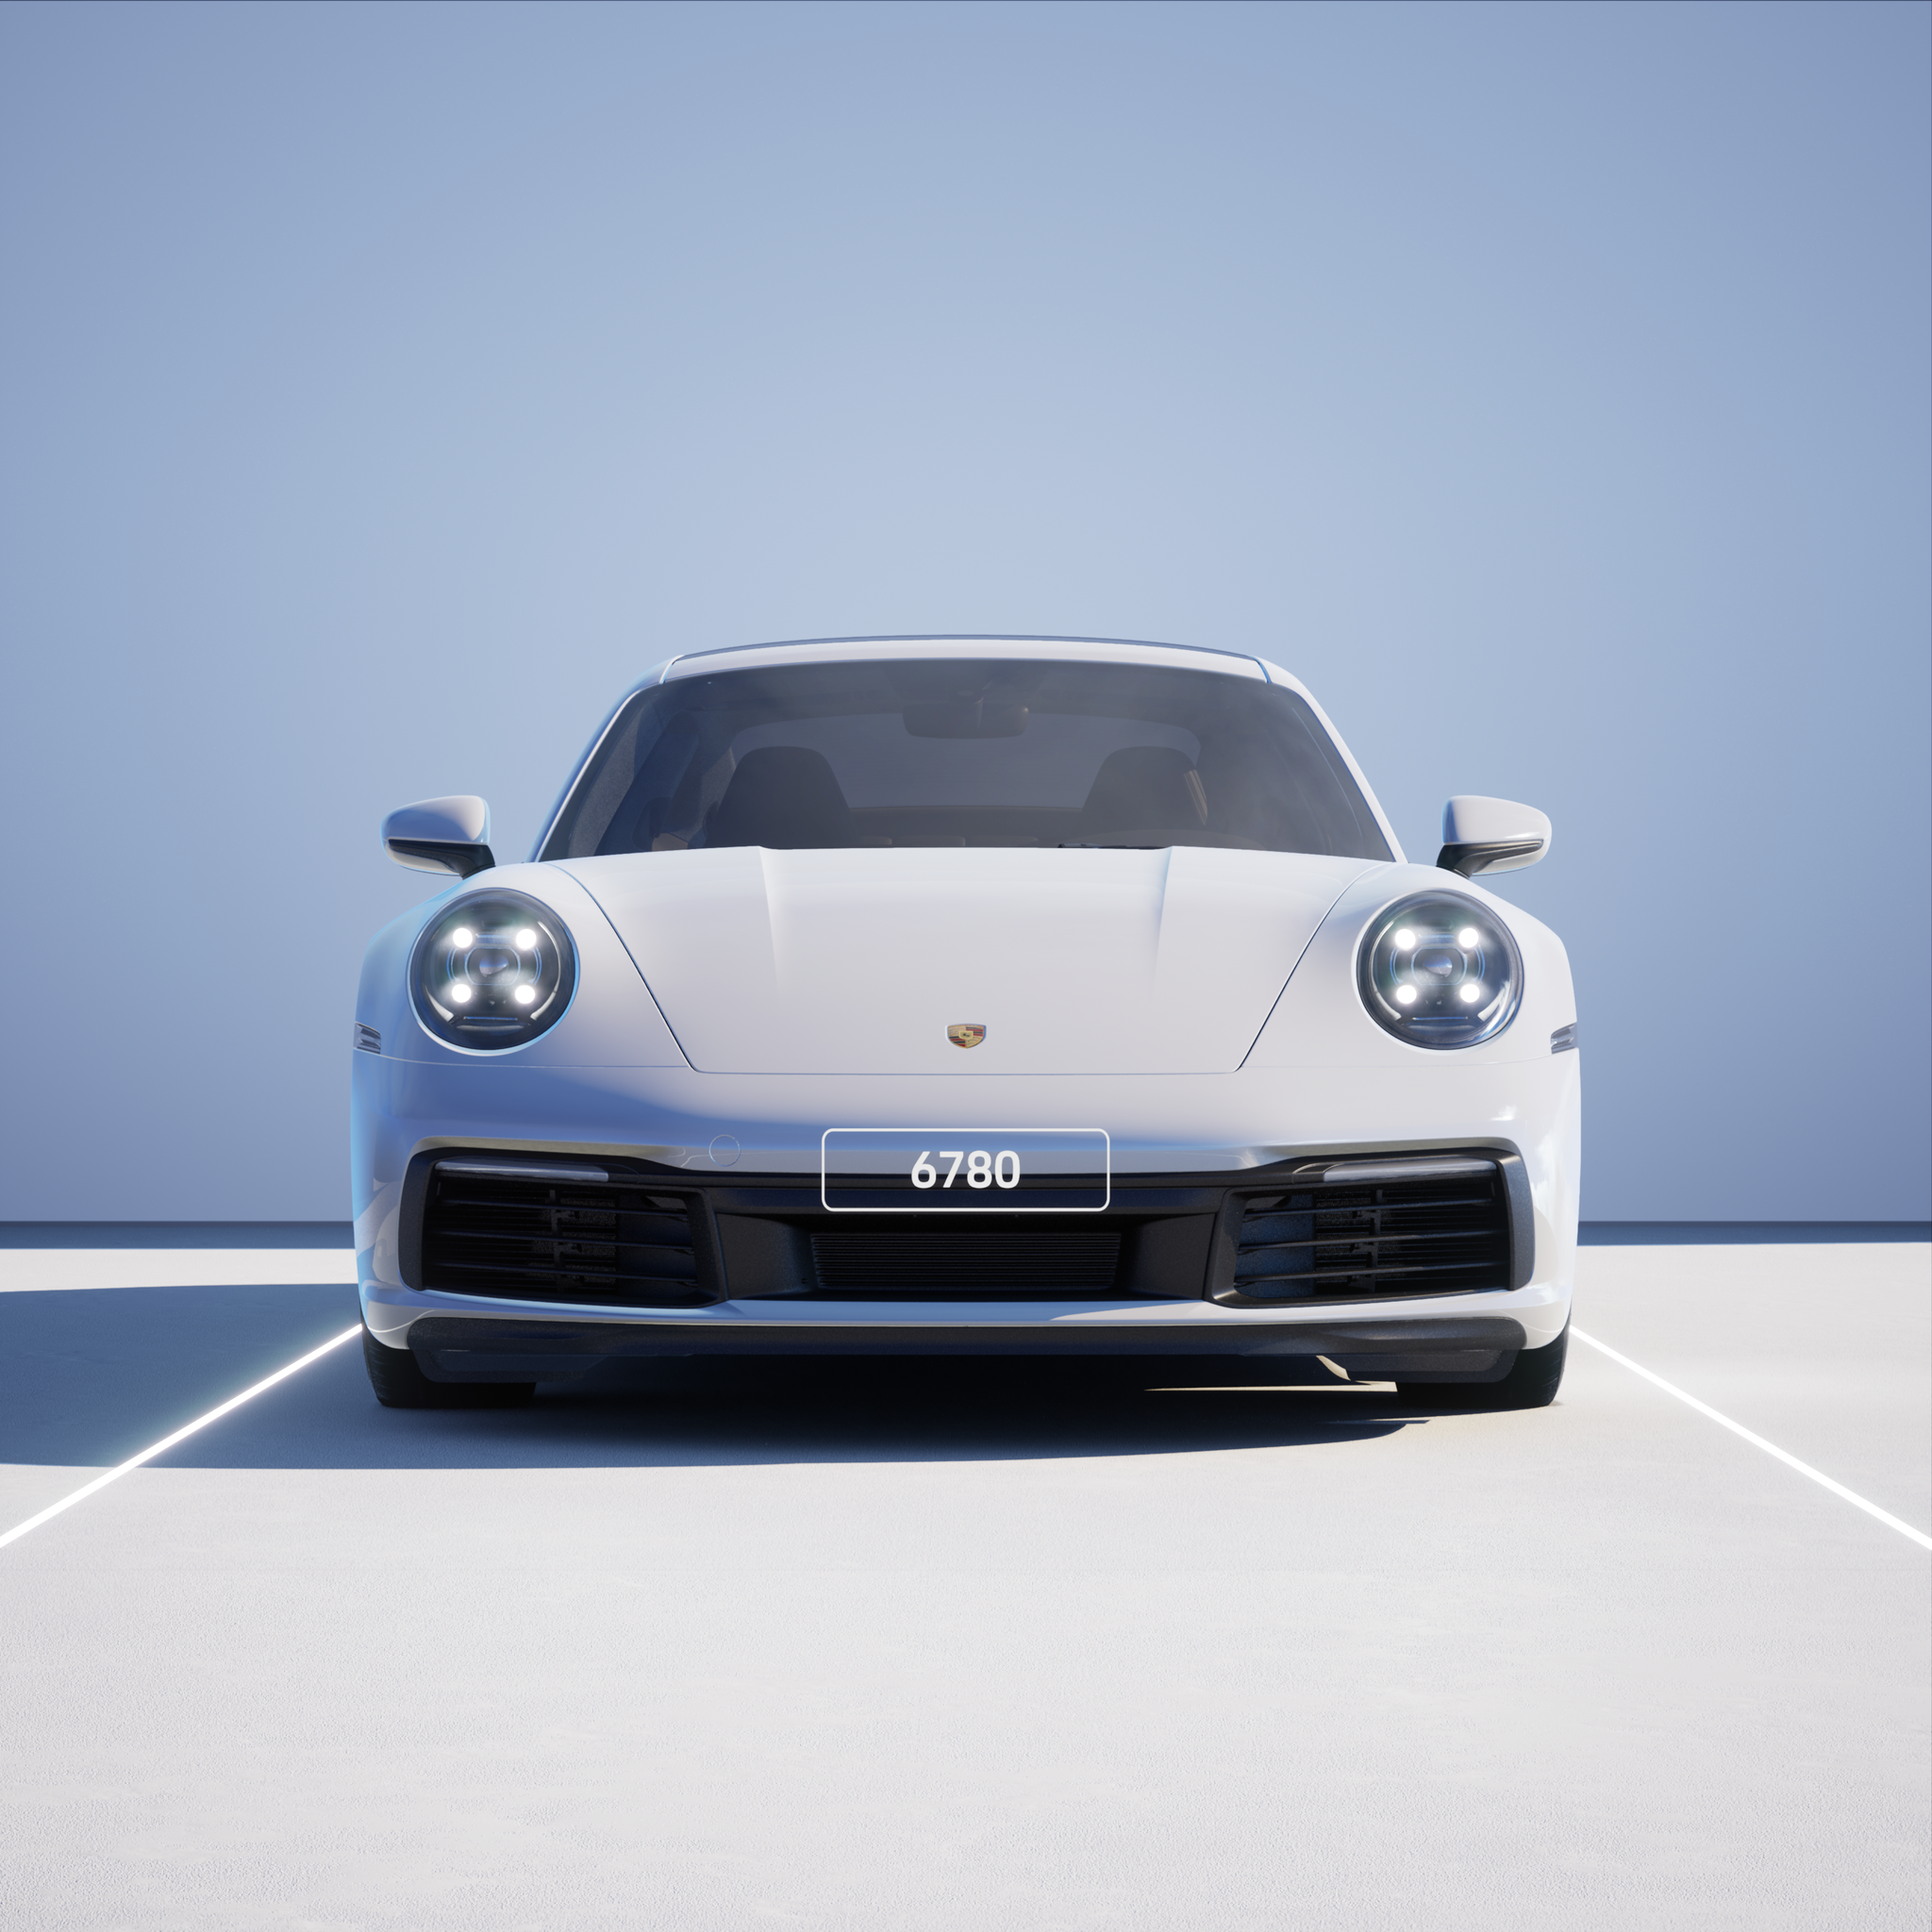 The PORSCHΞ 911 6780 image in phase